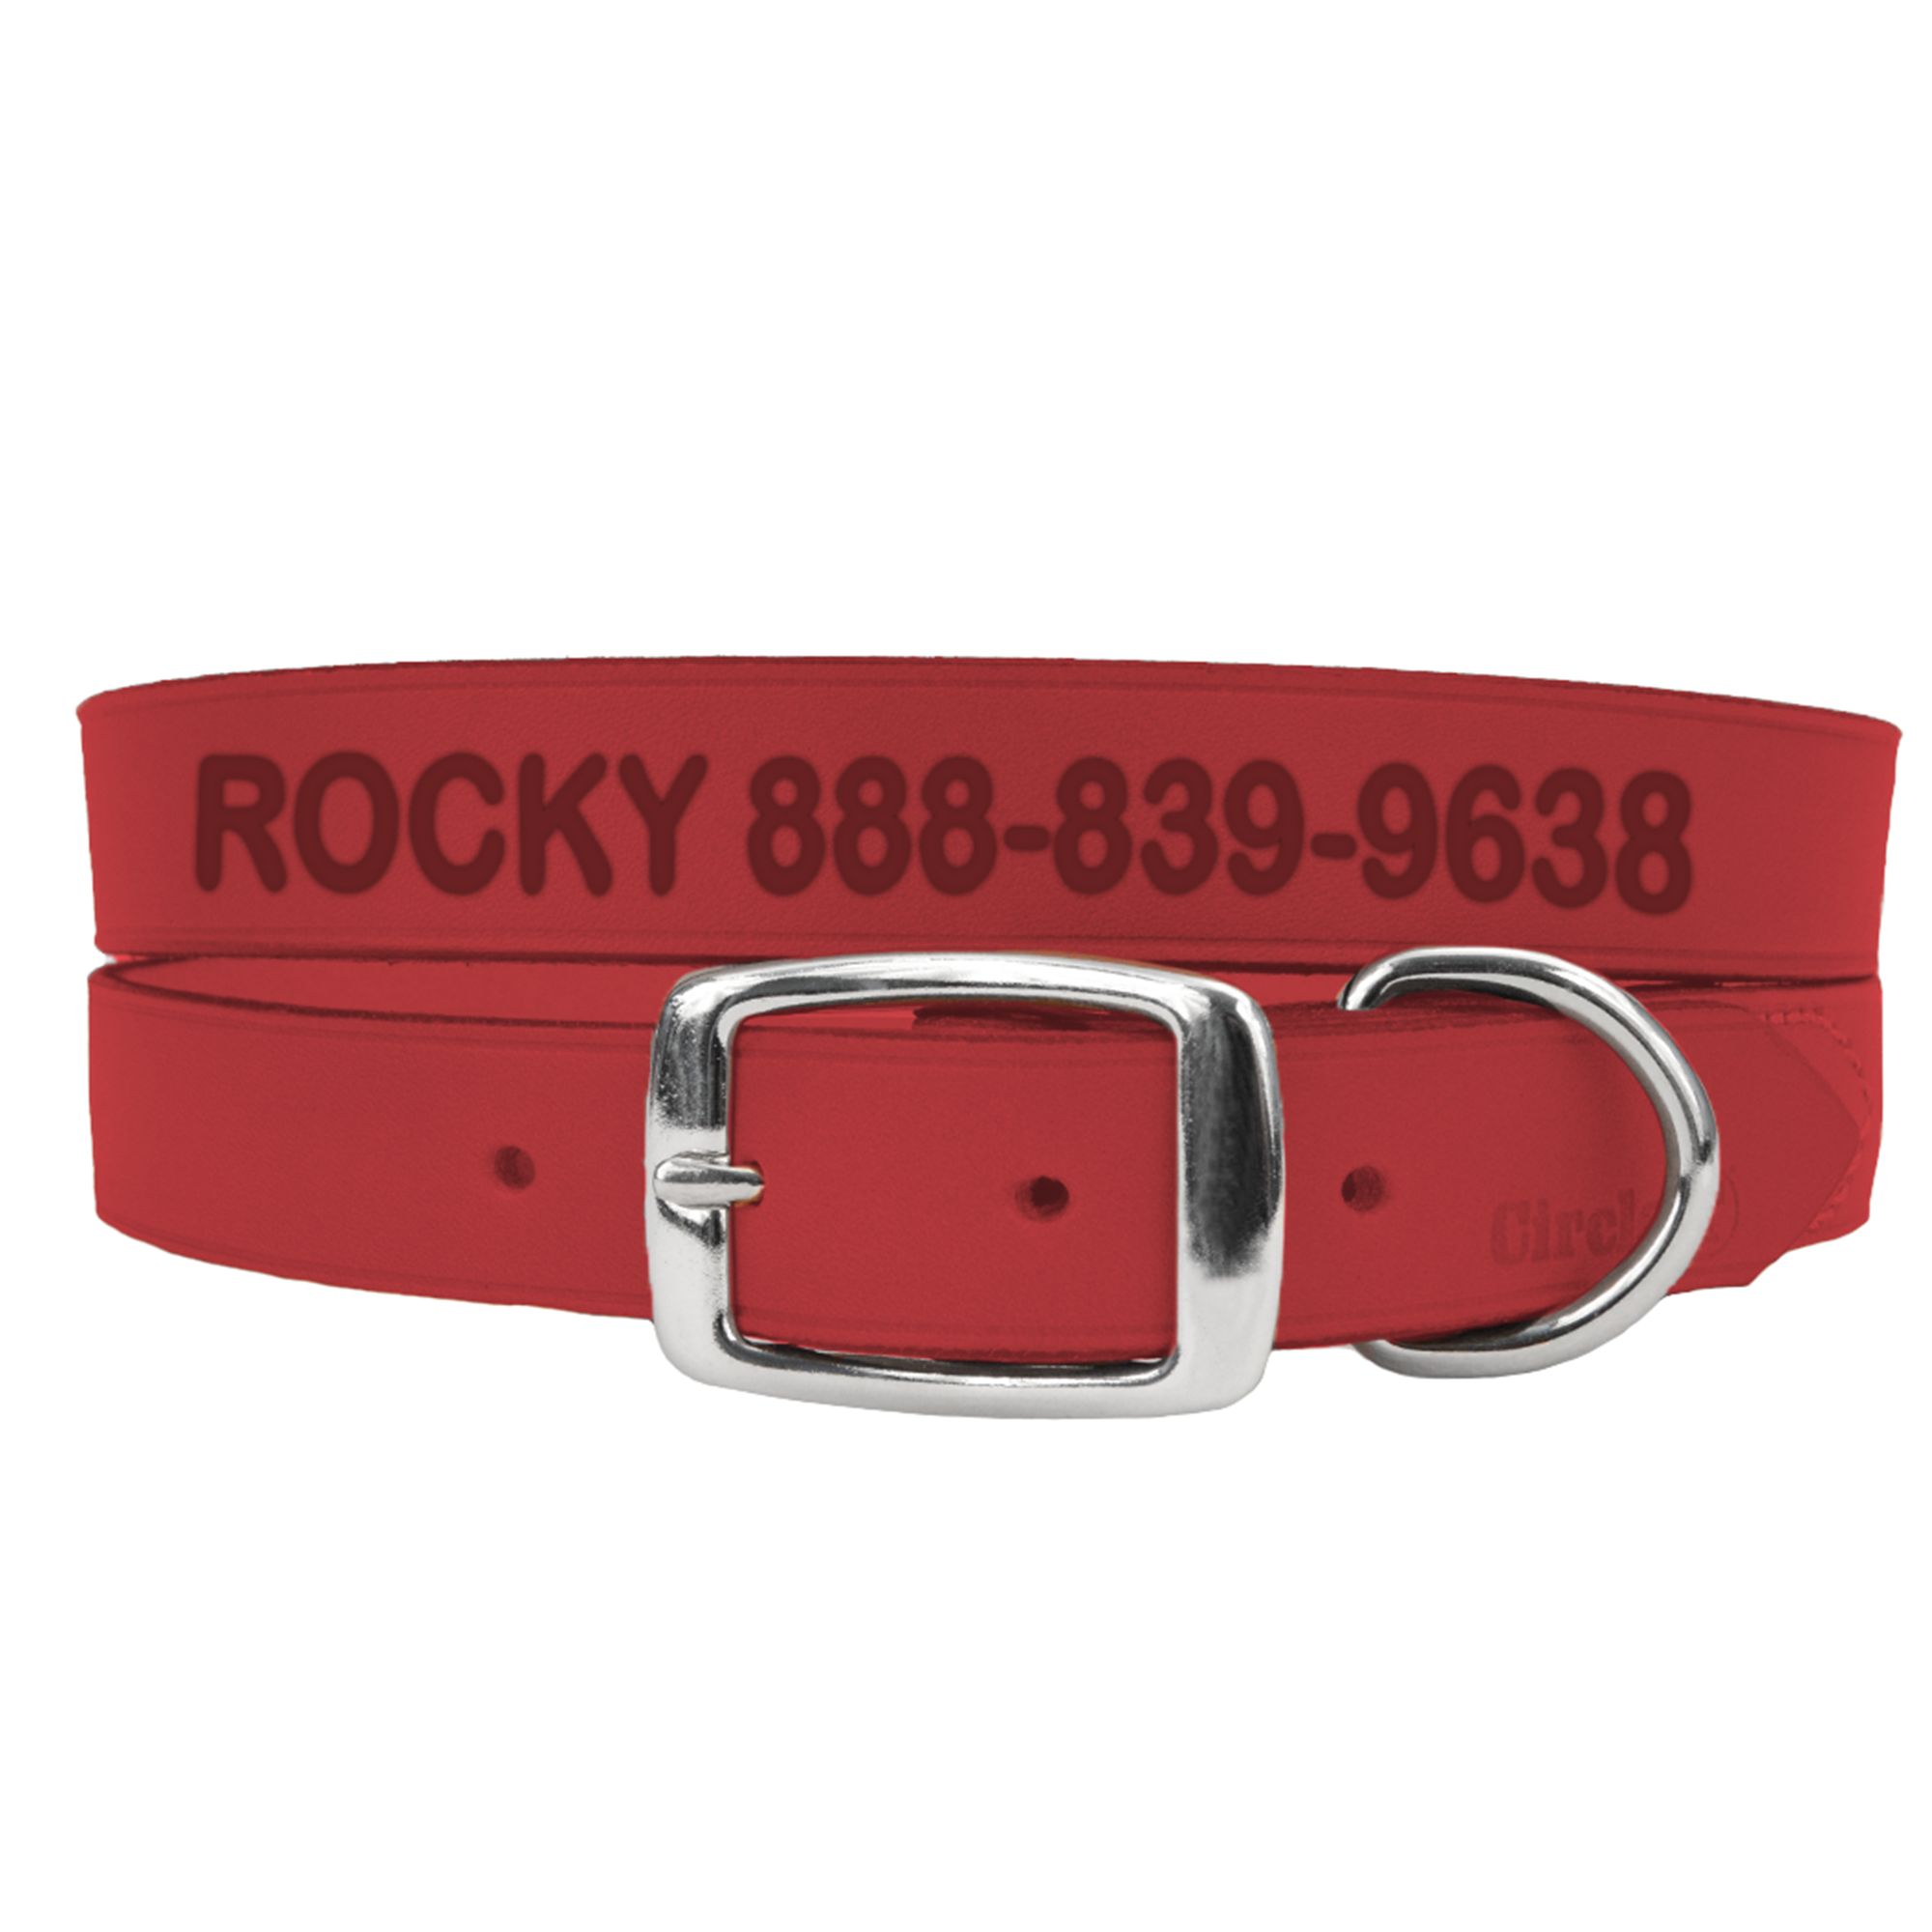 Coastal Pet Products Personalized Leather Dog Collar in Red, Size: 18L x 0.75W | PetSmart